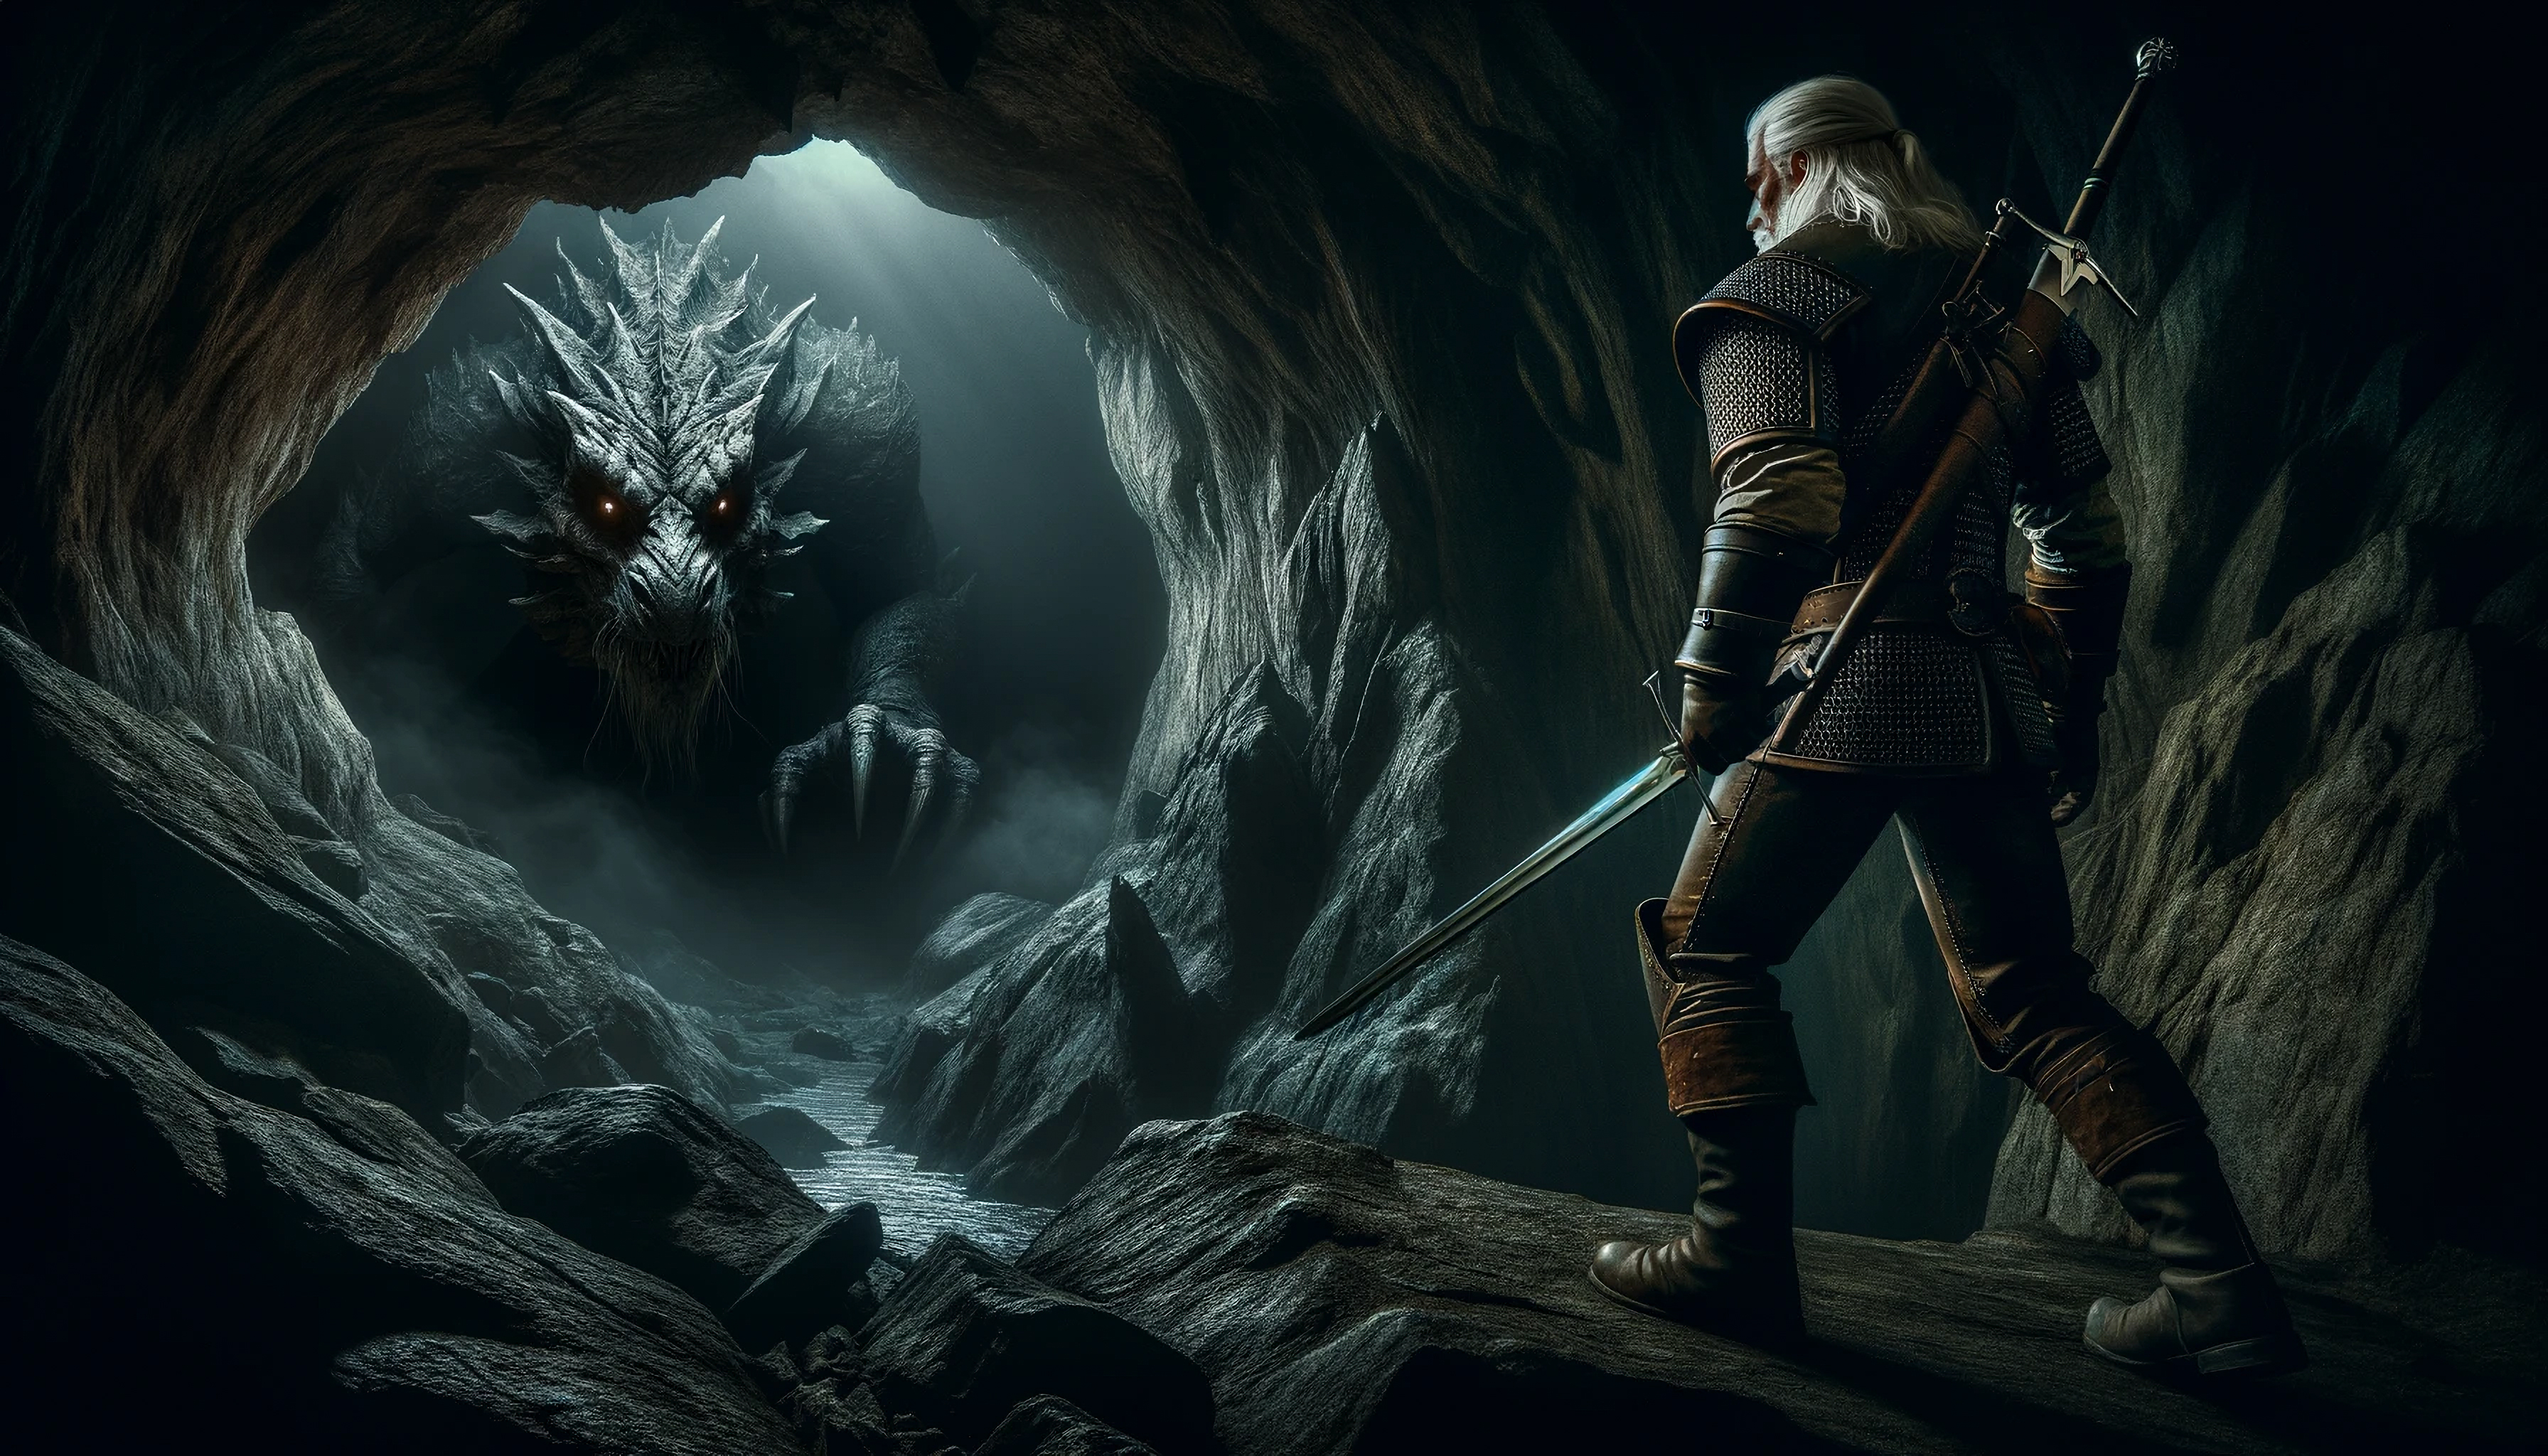 General 3584x2048 AI art digital art video games creature The Witcher 3: Wild Hunt Geralt of Rivia sword video game characters The Witcher cave white hair armor video game men